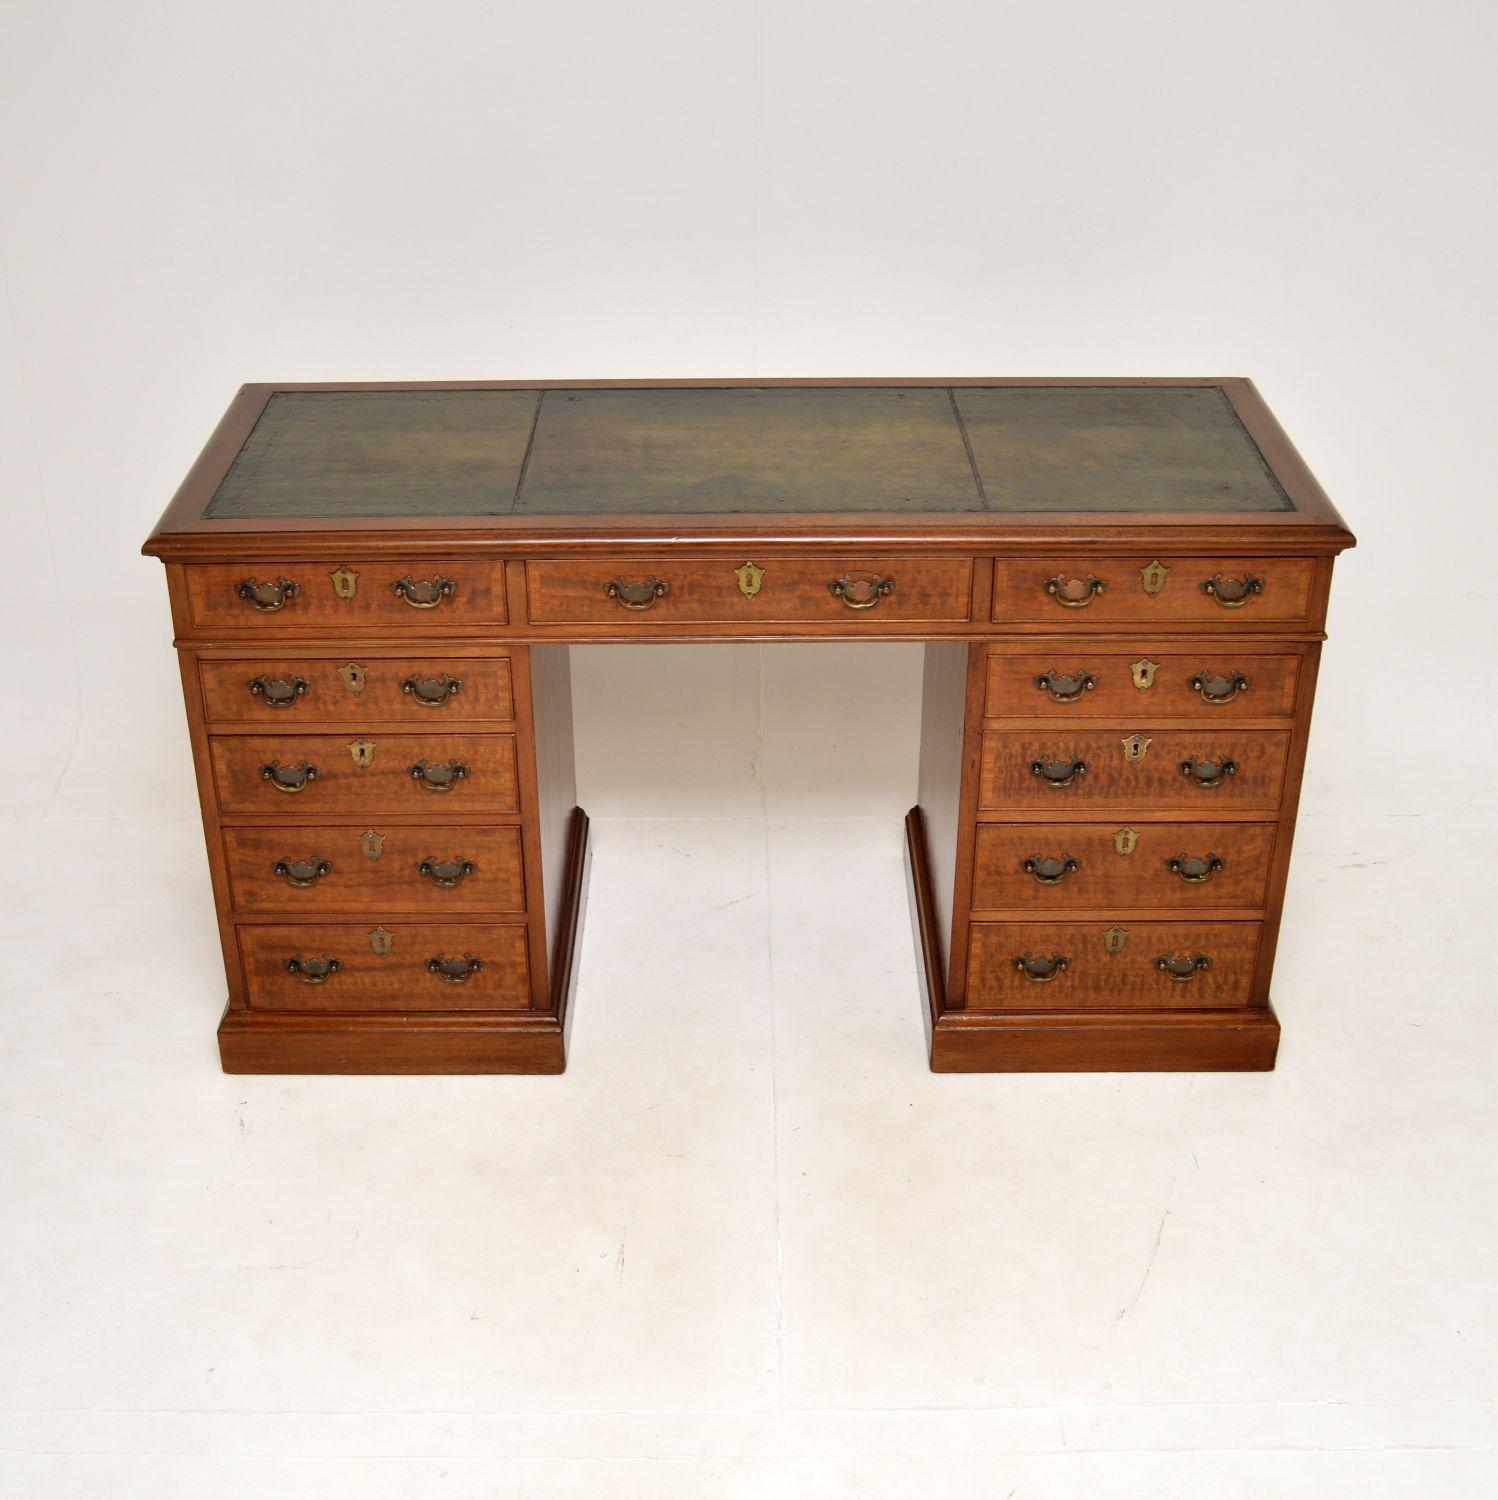 A smart and very well made antique leather top pedestal desk. This was made in England, it dates from around the 1930-50’s.

It is of outstanding quality and is a very useful size. It is quite wide and also slim from front to back, meaning it is not